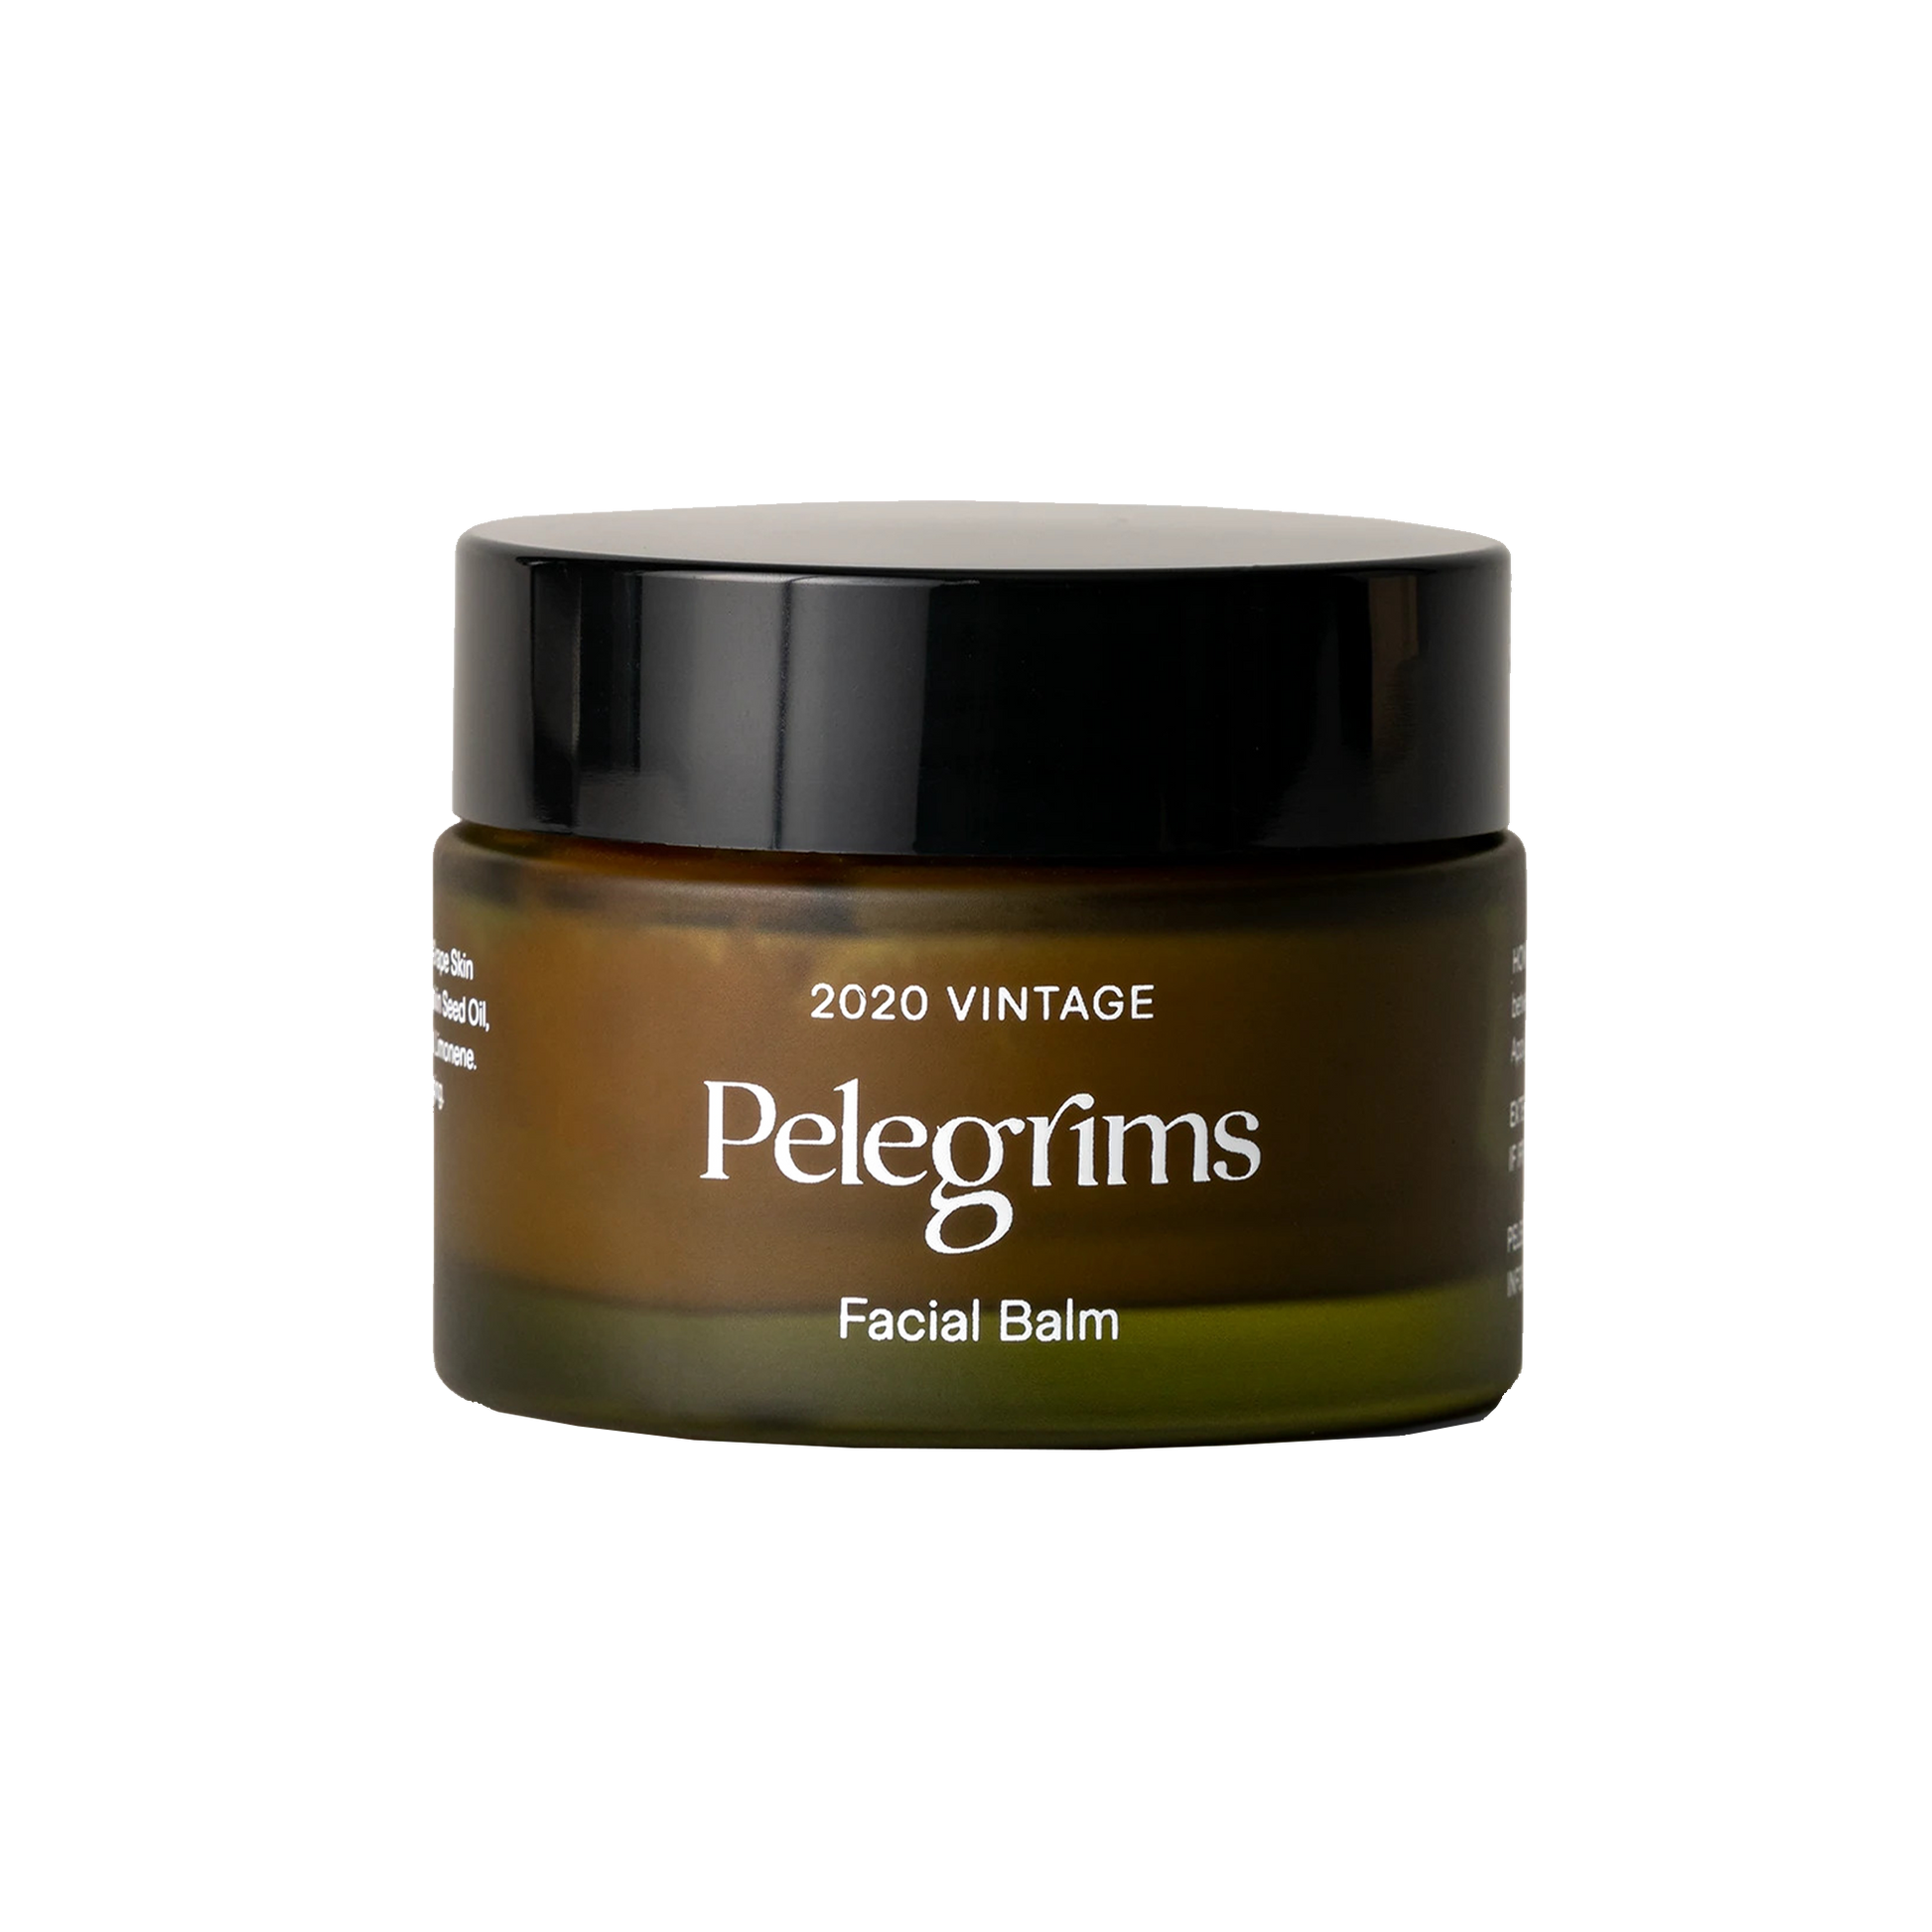 Pelegrims Facial Balm: A rich balm filled with nutrients that have been proven to visibly improve the appearance of the skin. A blend of Marine Algae, English Pinot Noir Extract and natural seed oils gently scented with notes of Fresh Air, Wild Rose and Sea Salt.